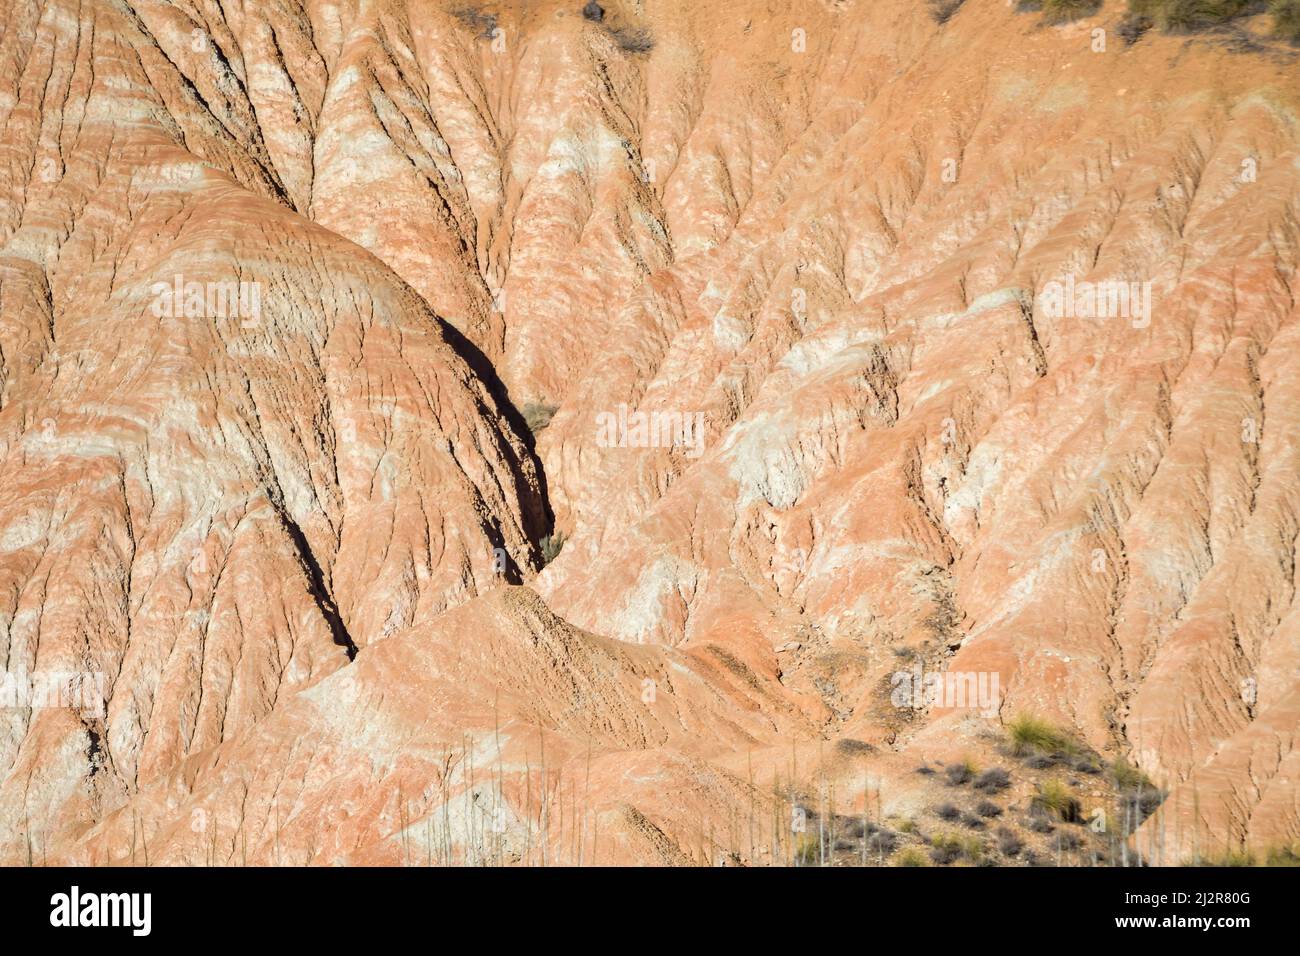 Badland, red lands without vegetation of the Granada Geopark. Stock Photo